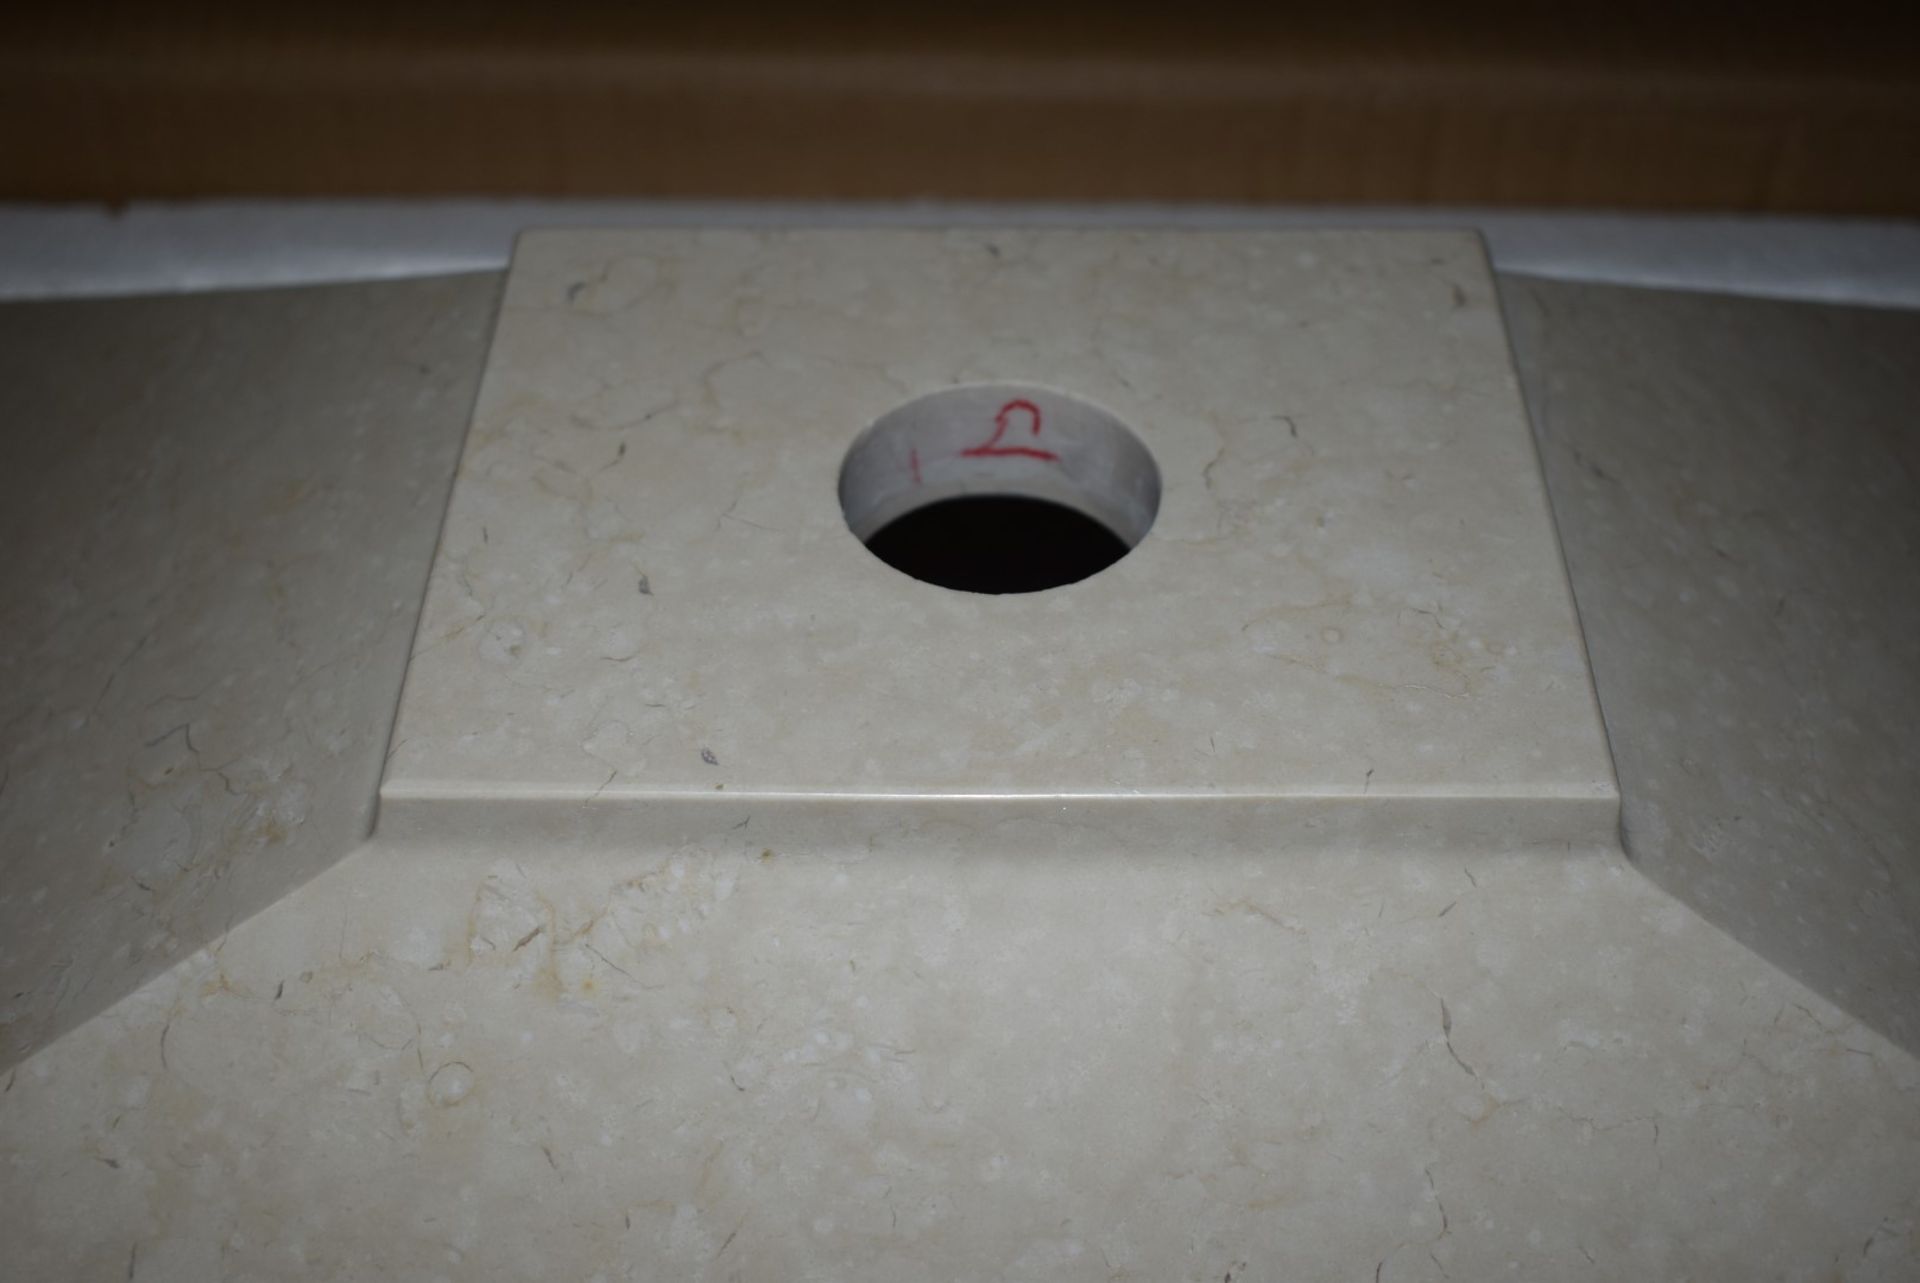 1 x Stonearth 'Karo' Solid Travertine Stone Countertop Sink Basin - New Boxed Stock - RRP £525.00 - Image 7 of 8